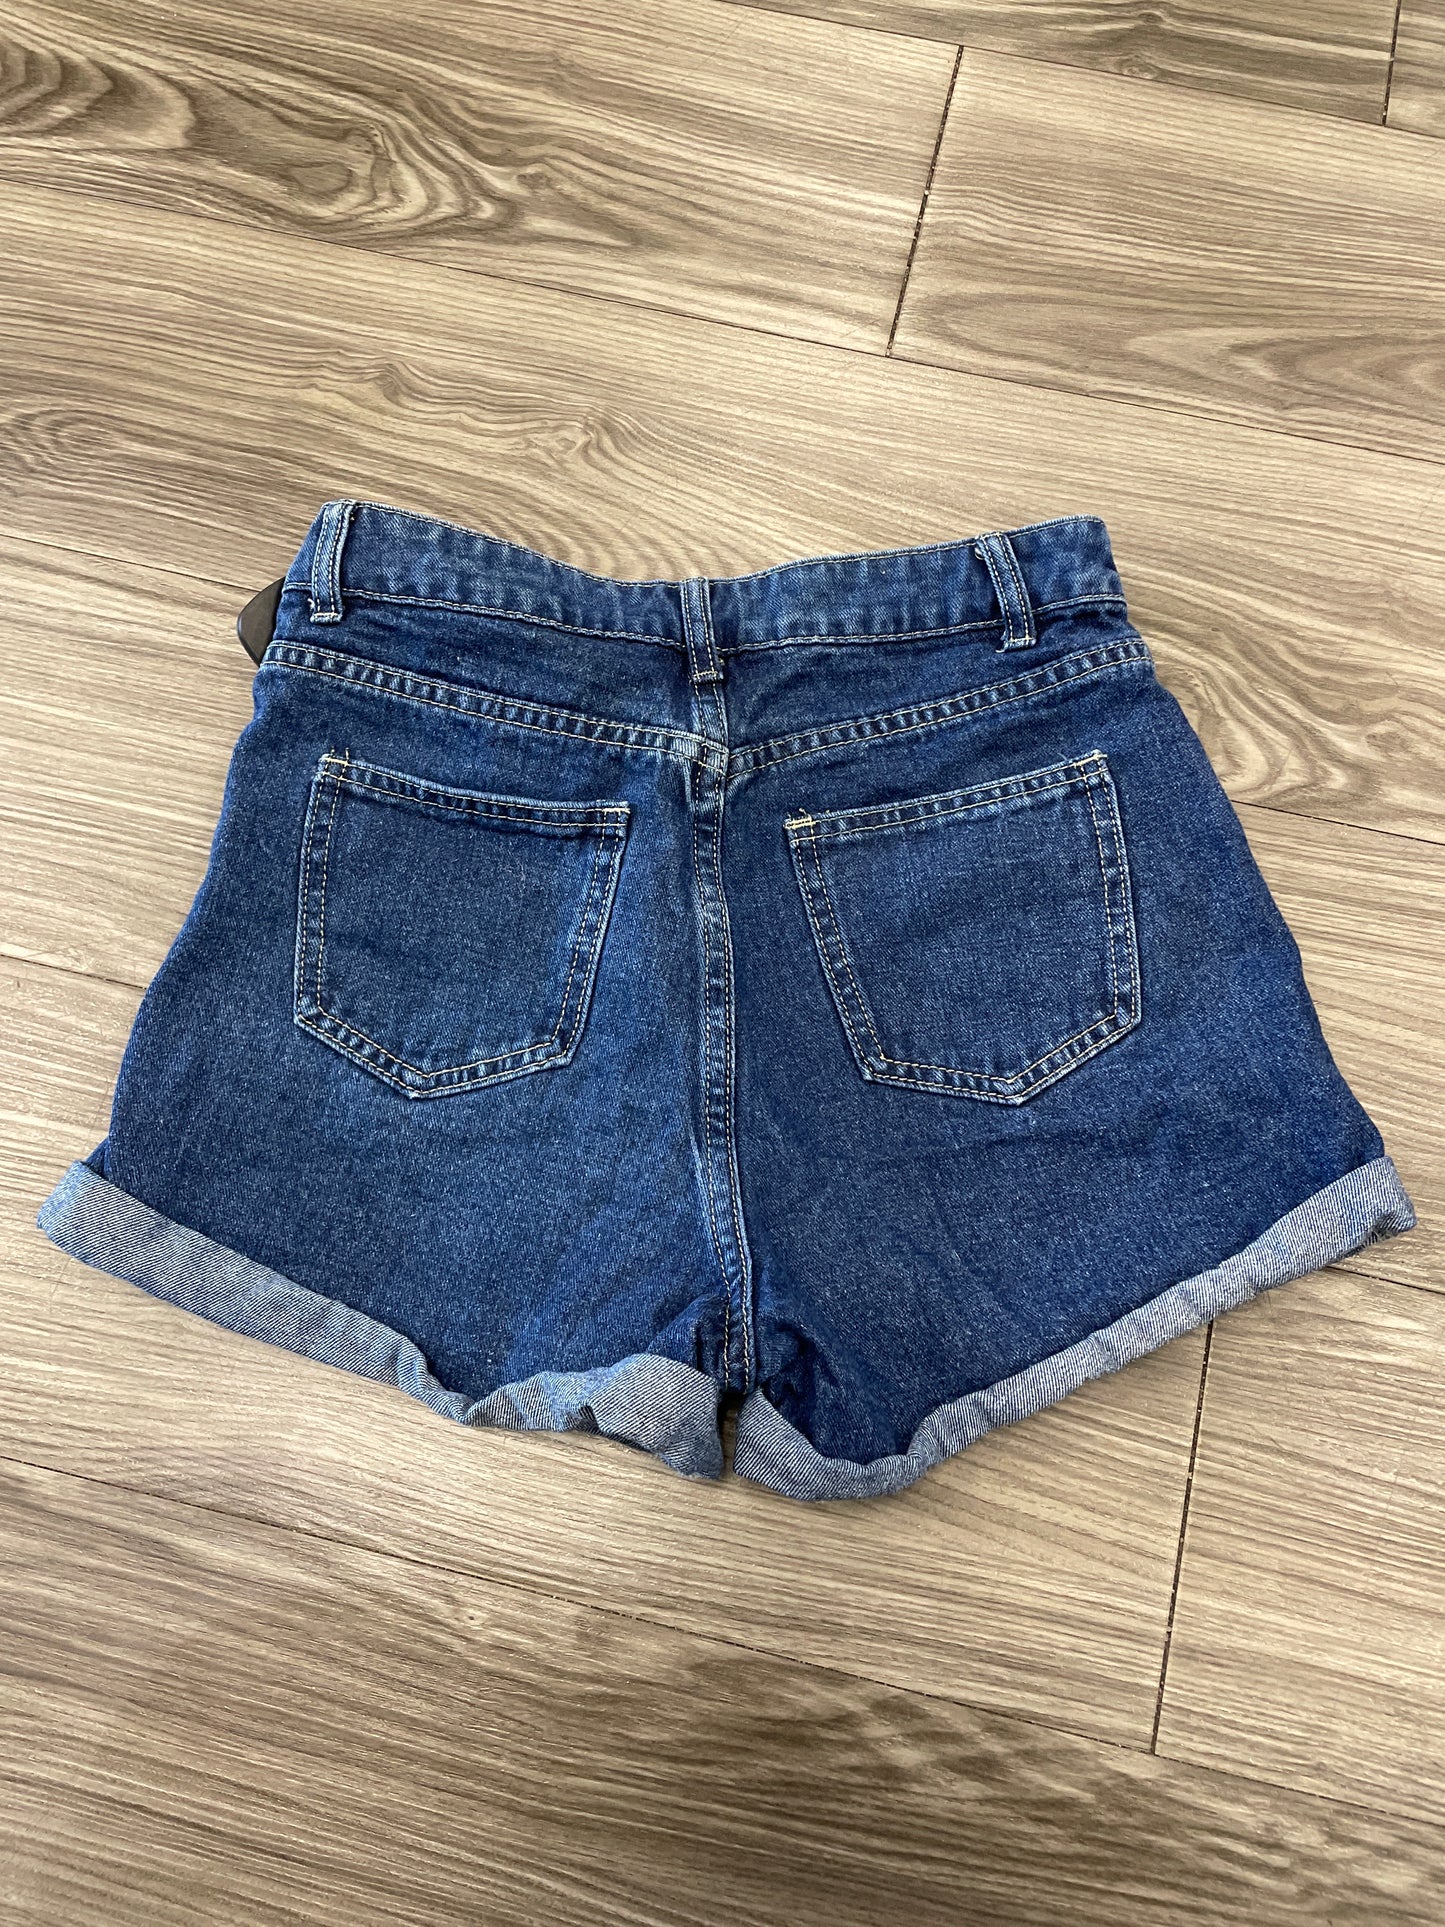 Shorts By Shein  Size: 4